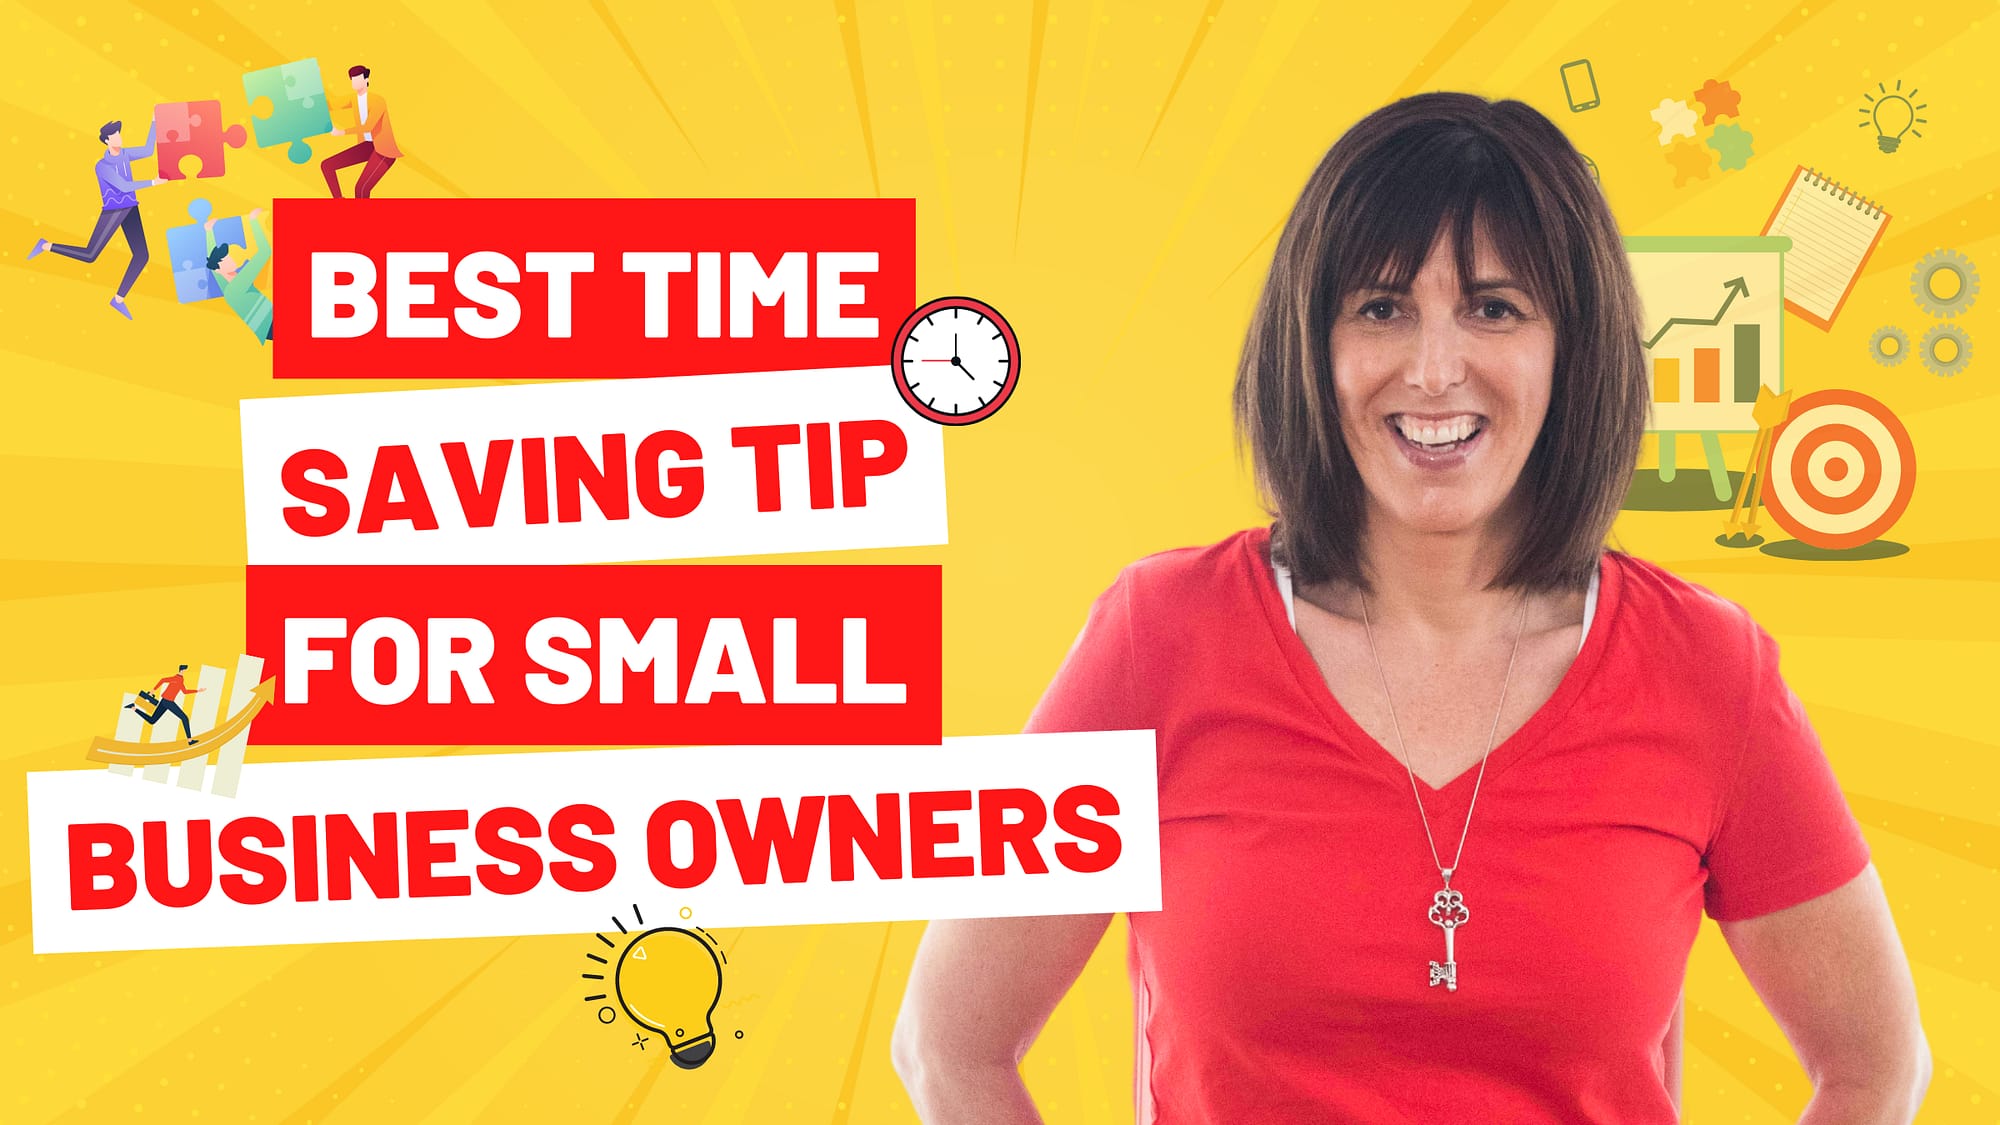 Best Time Saving Tip for Small Business Owners